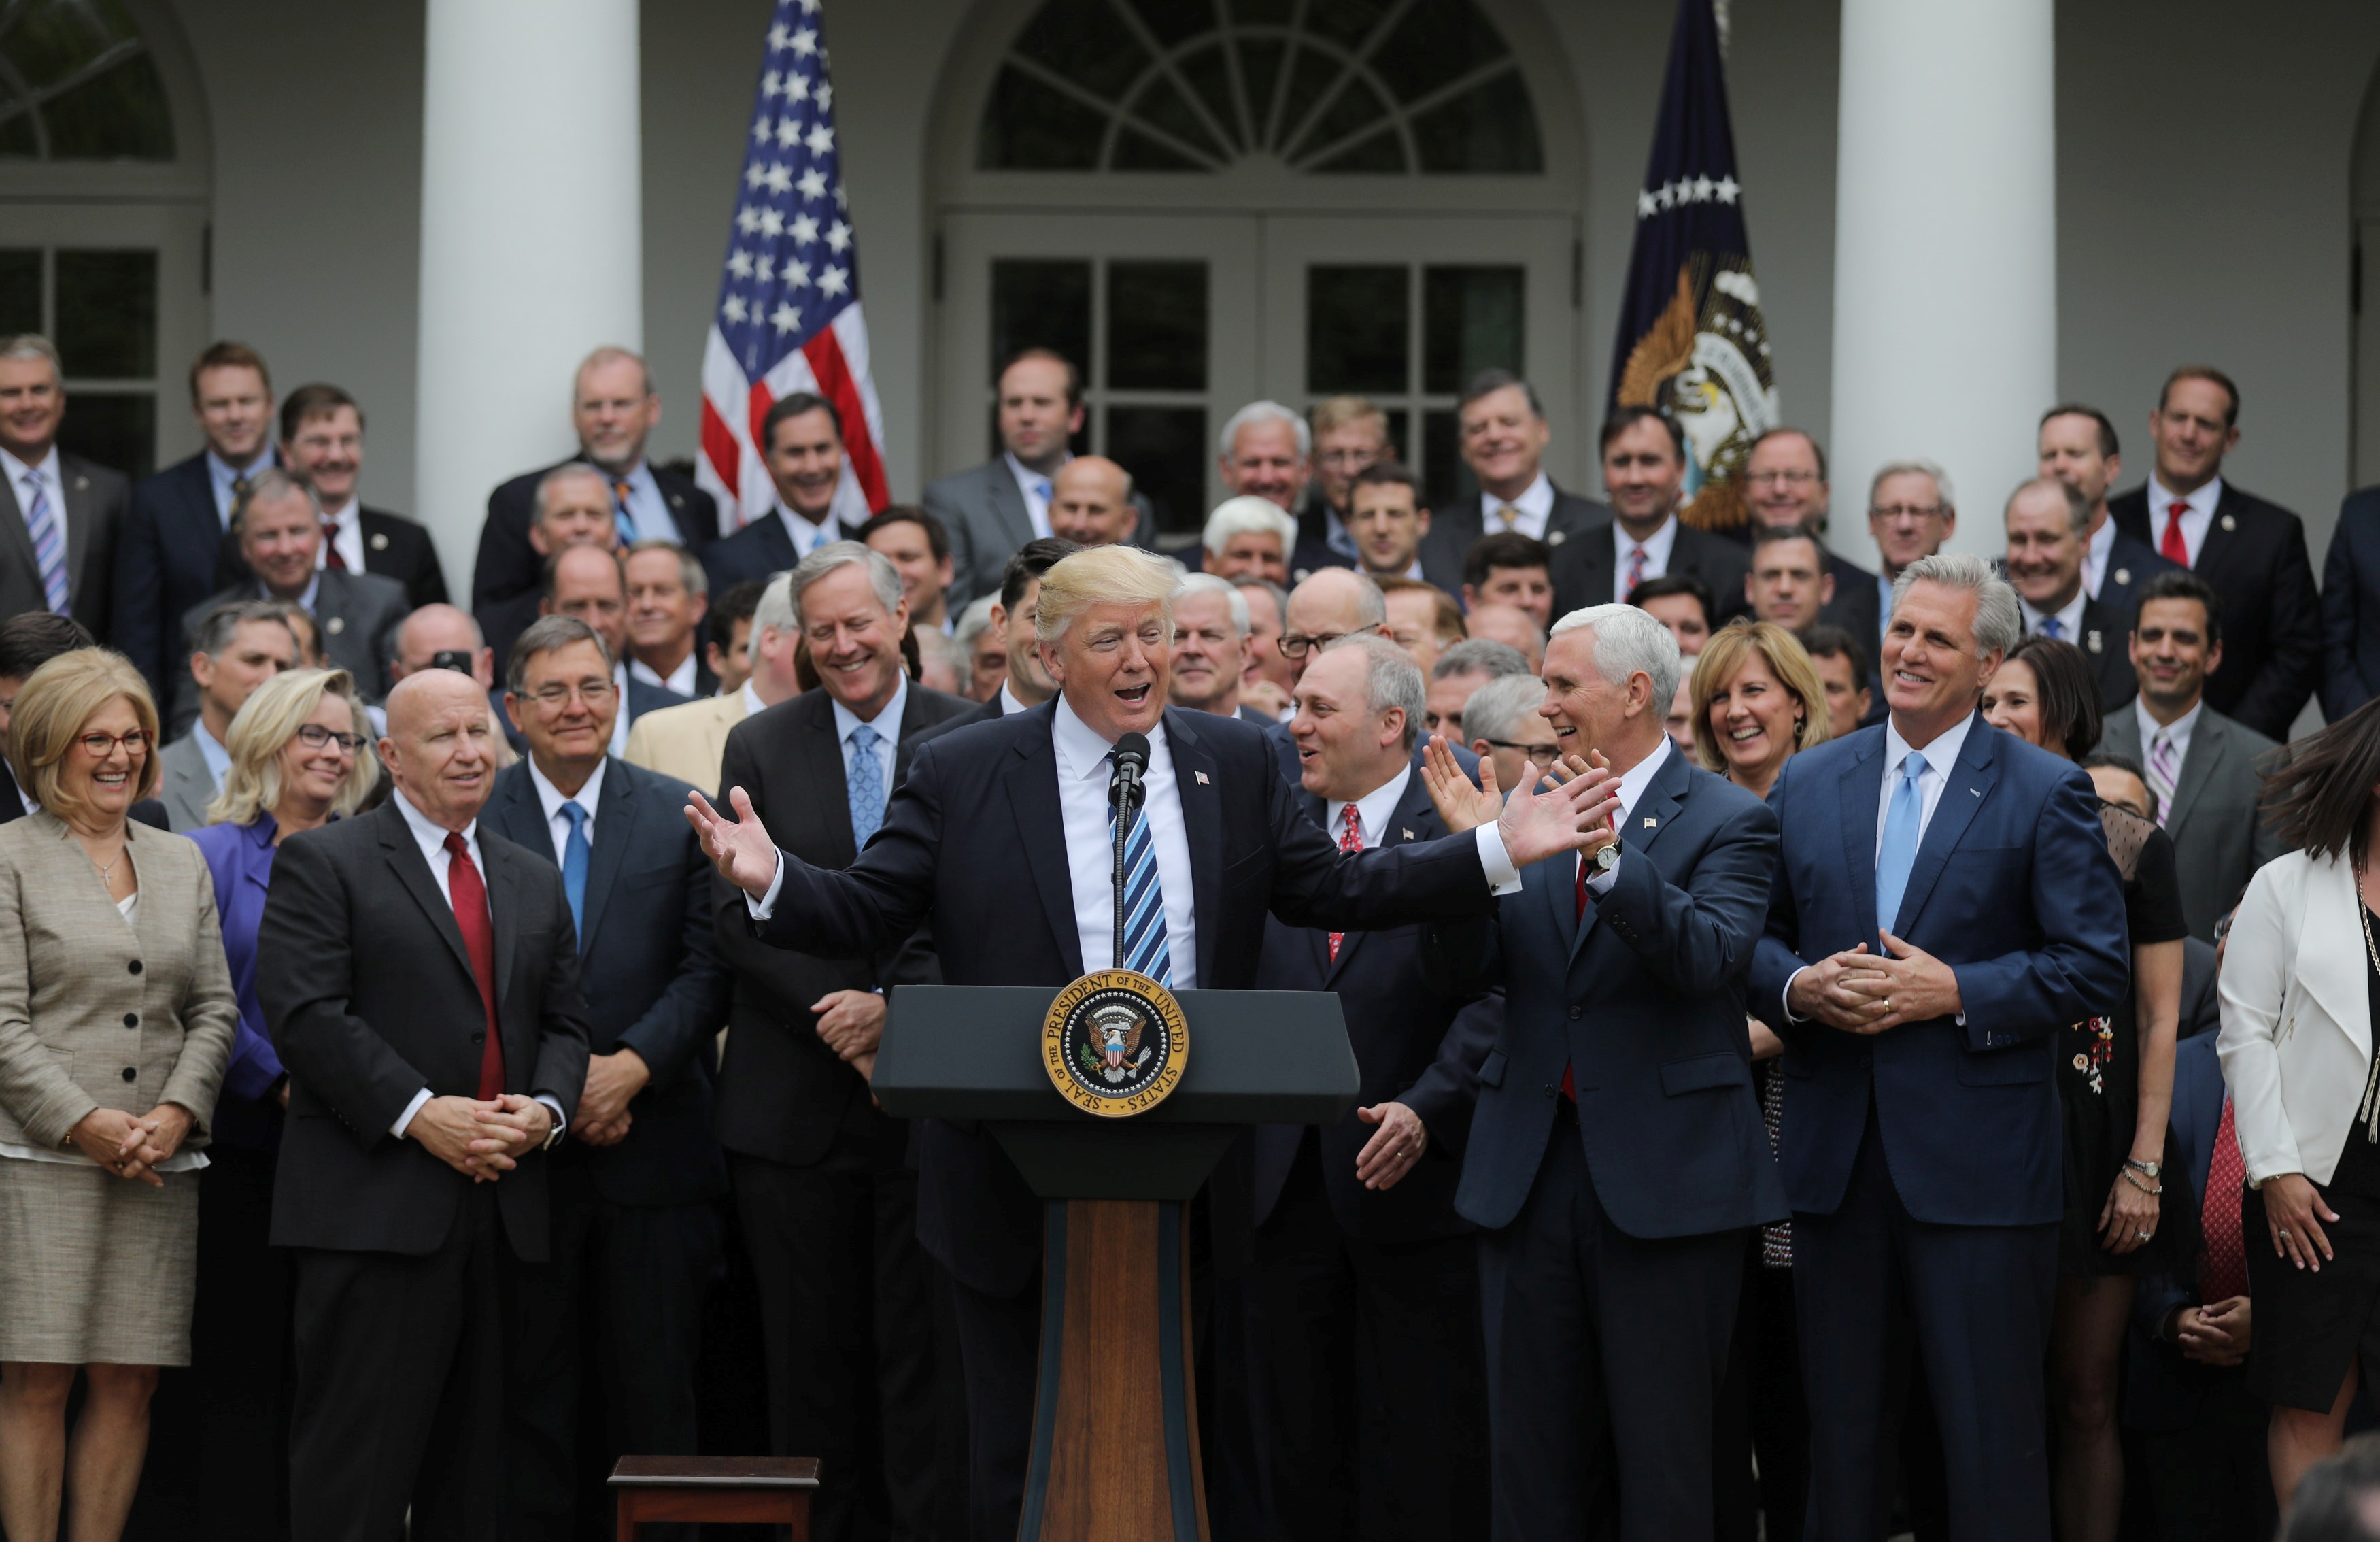 President Donald Trump gathers with Congressional Republicans in the Rose Garden of the White House after the House of Representatives approved the American Healthcare Act, to repeal major parts of Obamacare and replace it with the Republican healthcare plan, in Washington, May 4, 2017. (Carlos Barria&mdash;Reuters)